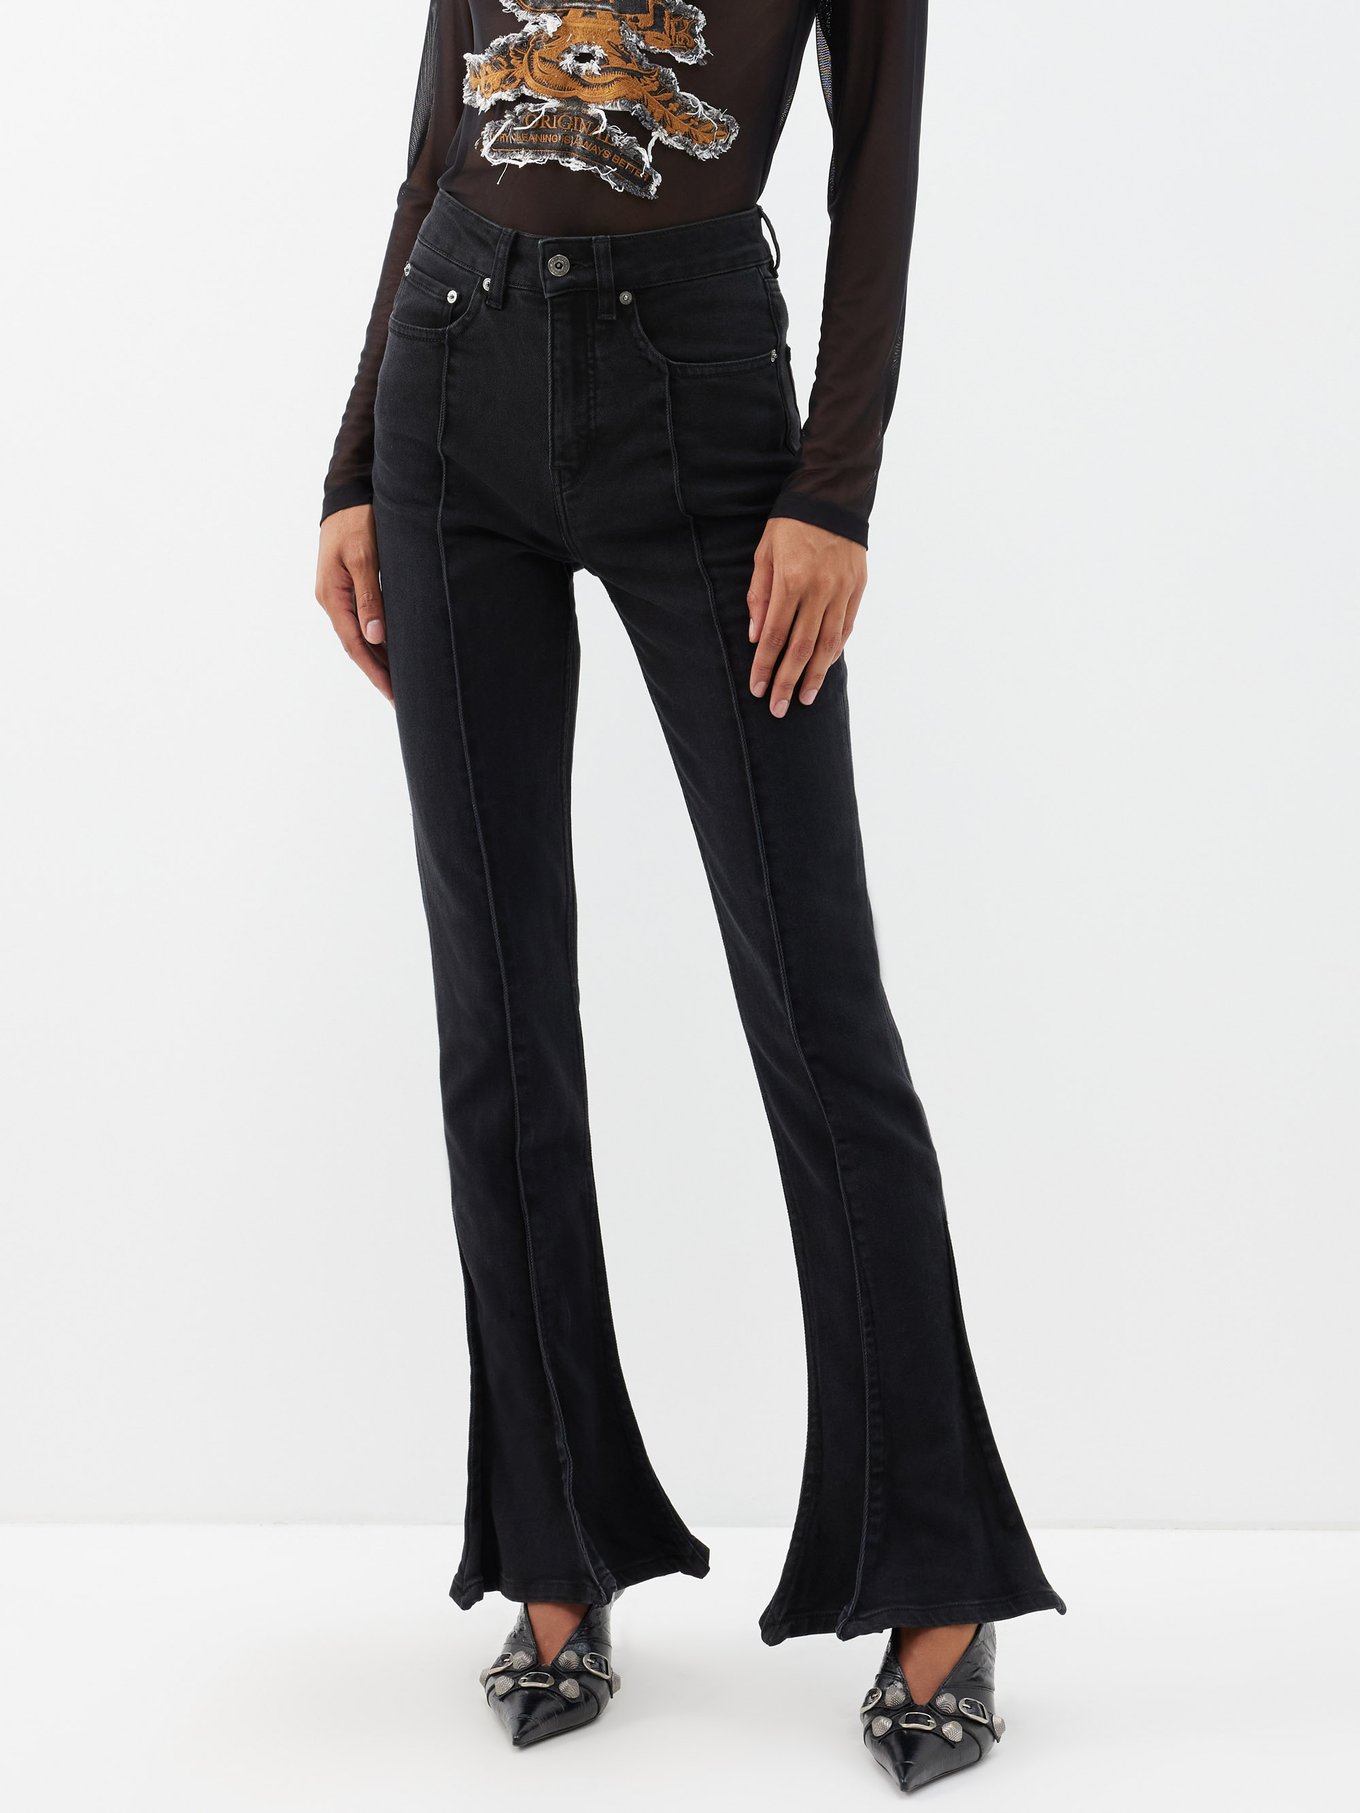 Black Trumpet flared jeans, Y/Project